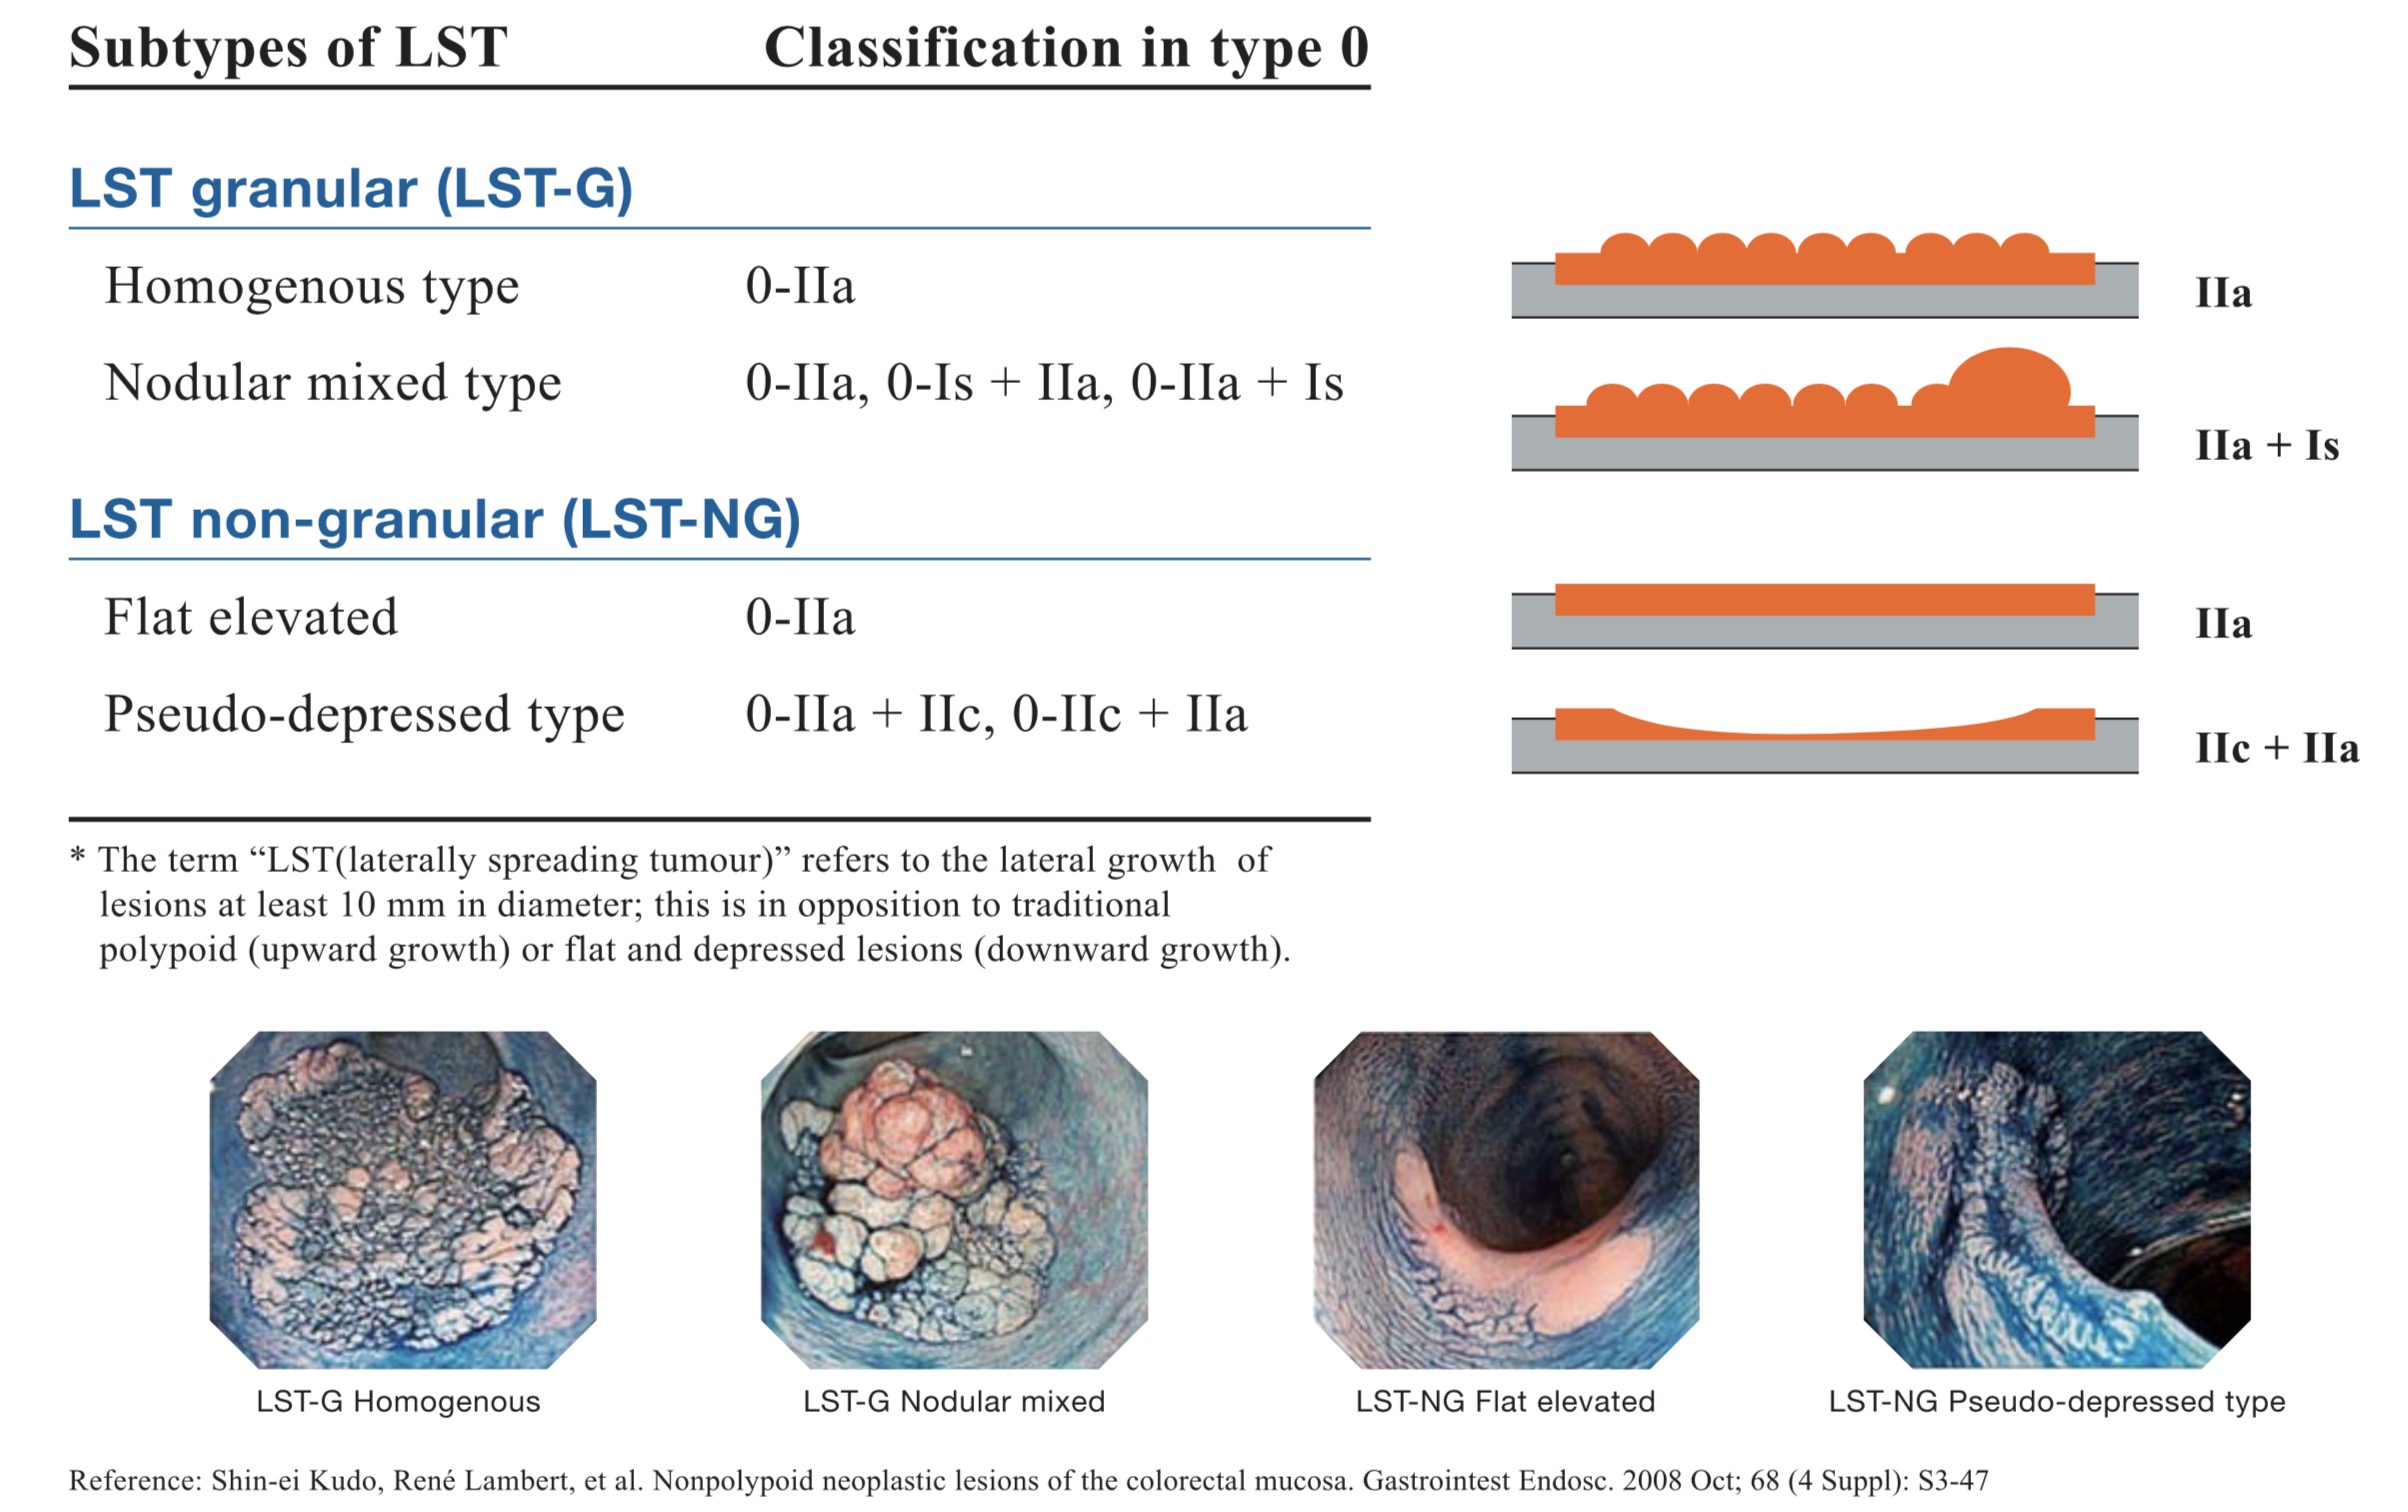 Subtypes of LST* lesions: Morphologic classification of LST lesions and their correspondence in the Paris-Japanese classification